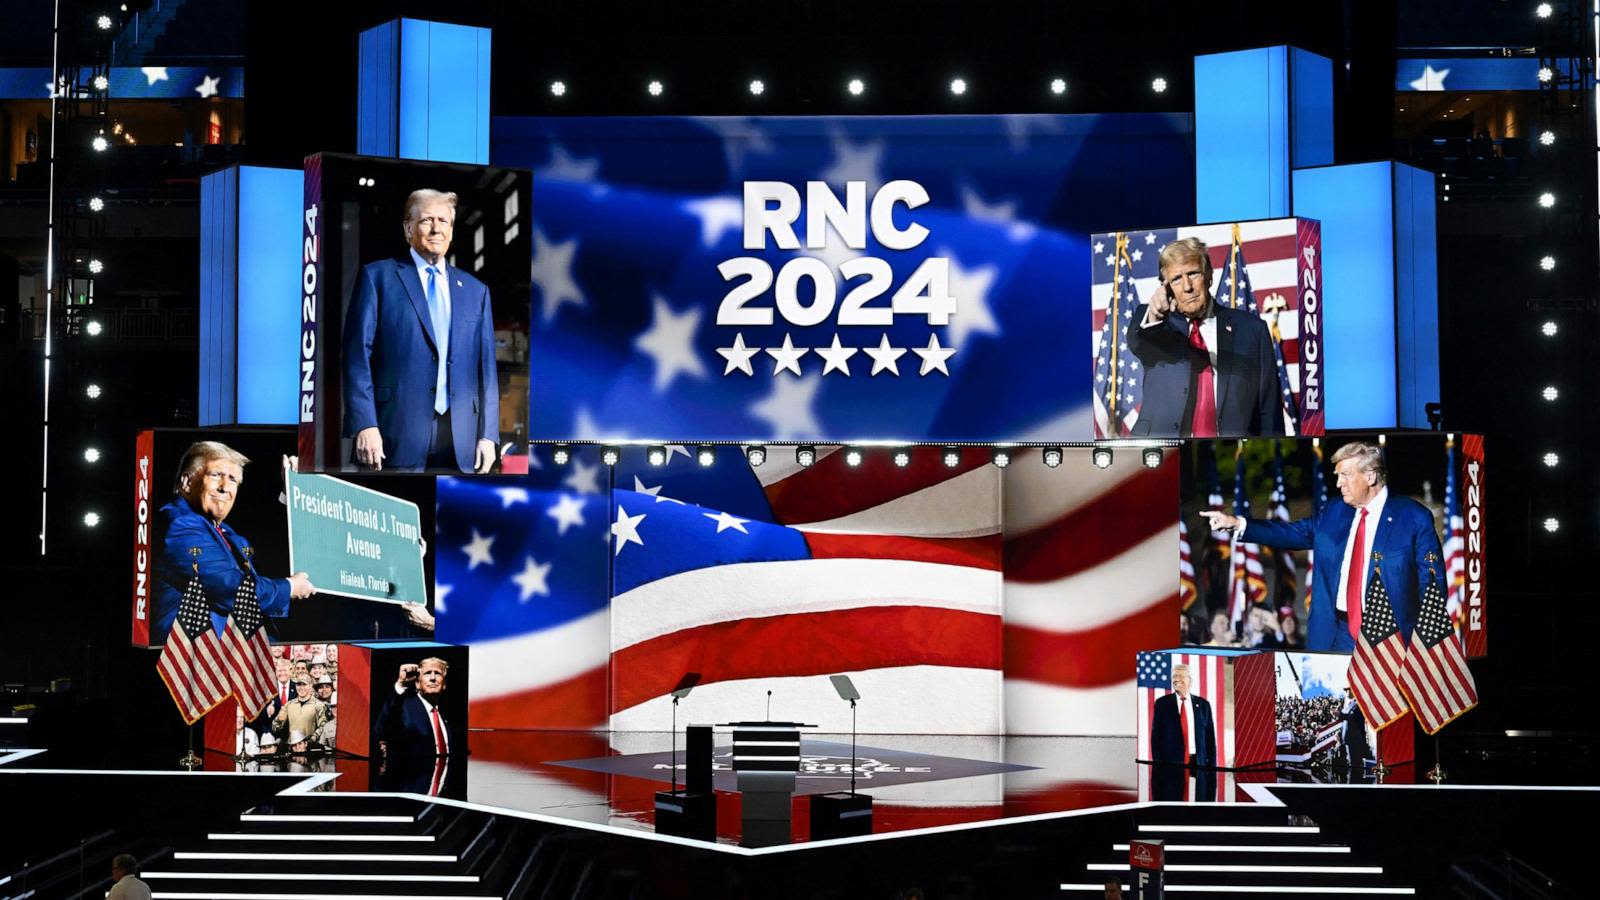 RNC 2024 Day 1 live updates: Trump says he'll announce VP pick today